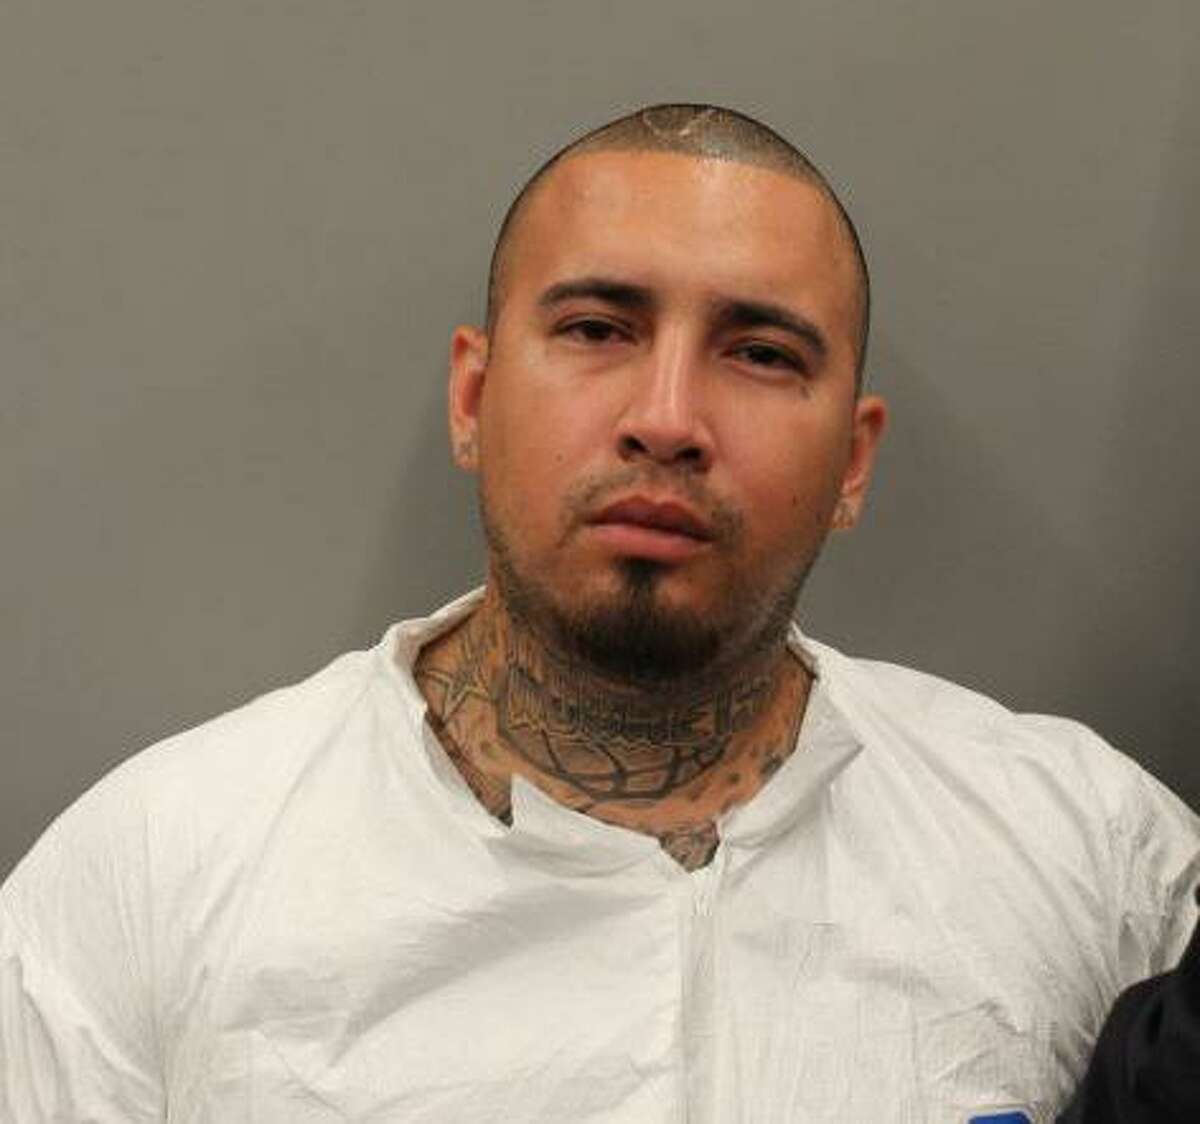 David Cruz, 28, was charged with murder for allegedly shooting Christian Tristan, 27, to death at 7400 Satsuma on Aug. 5, 2019.